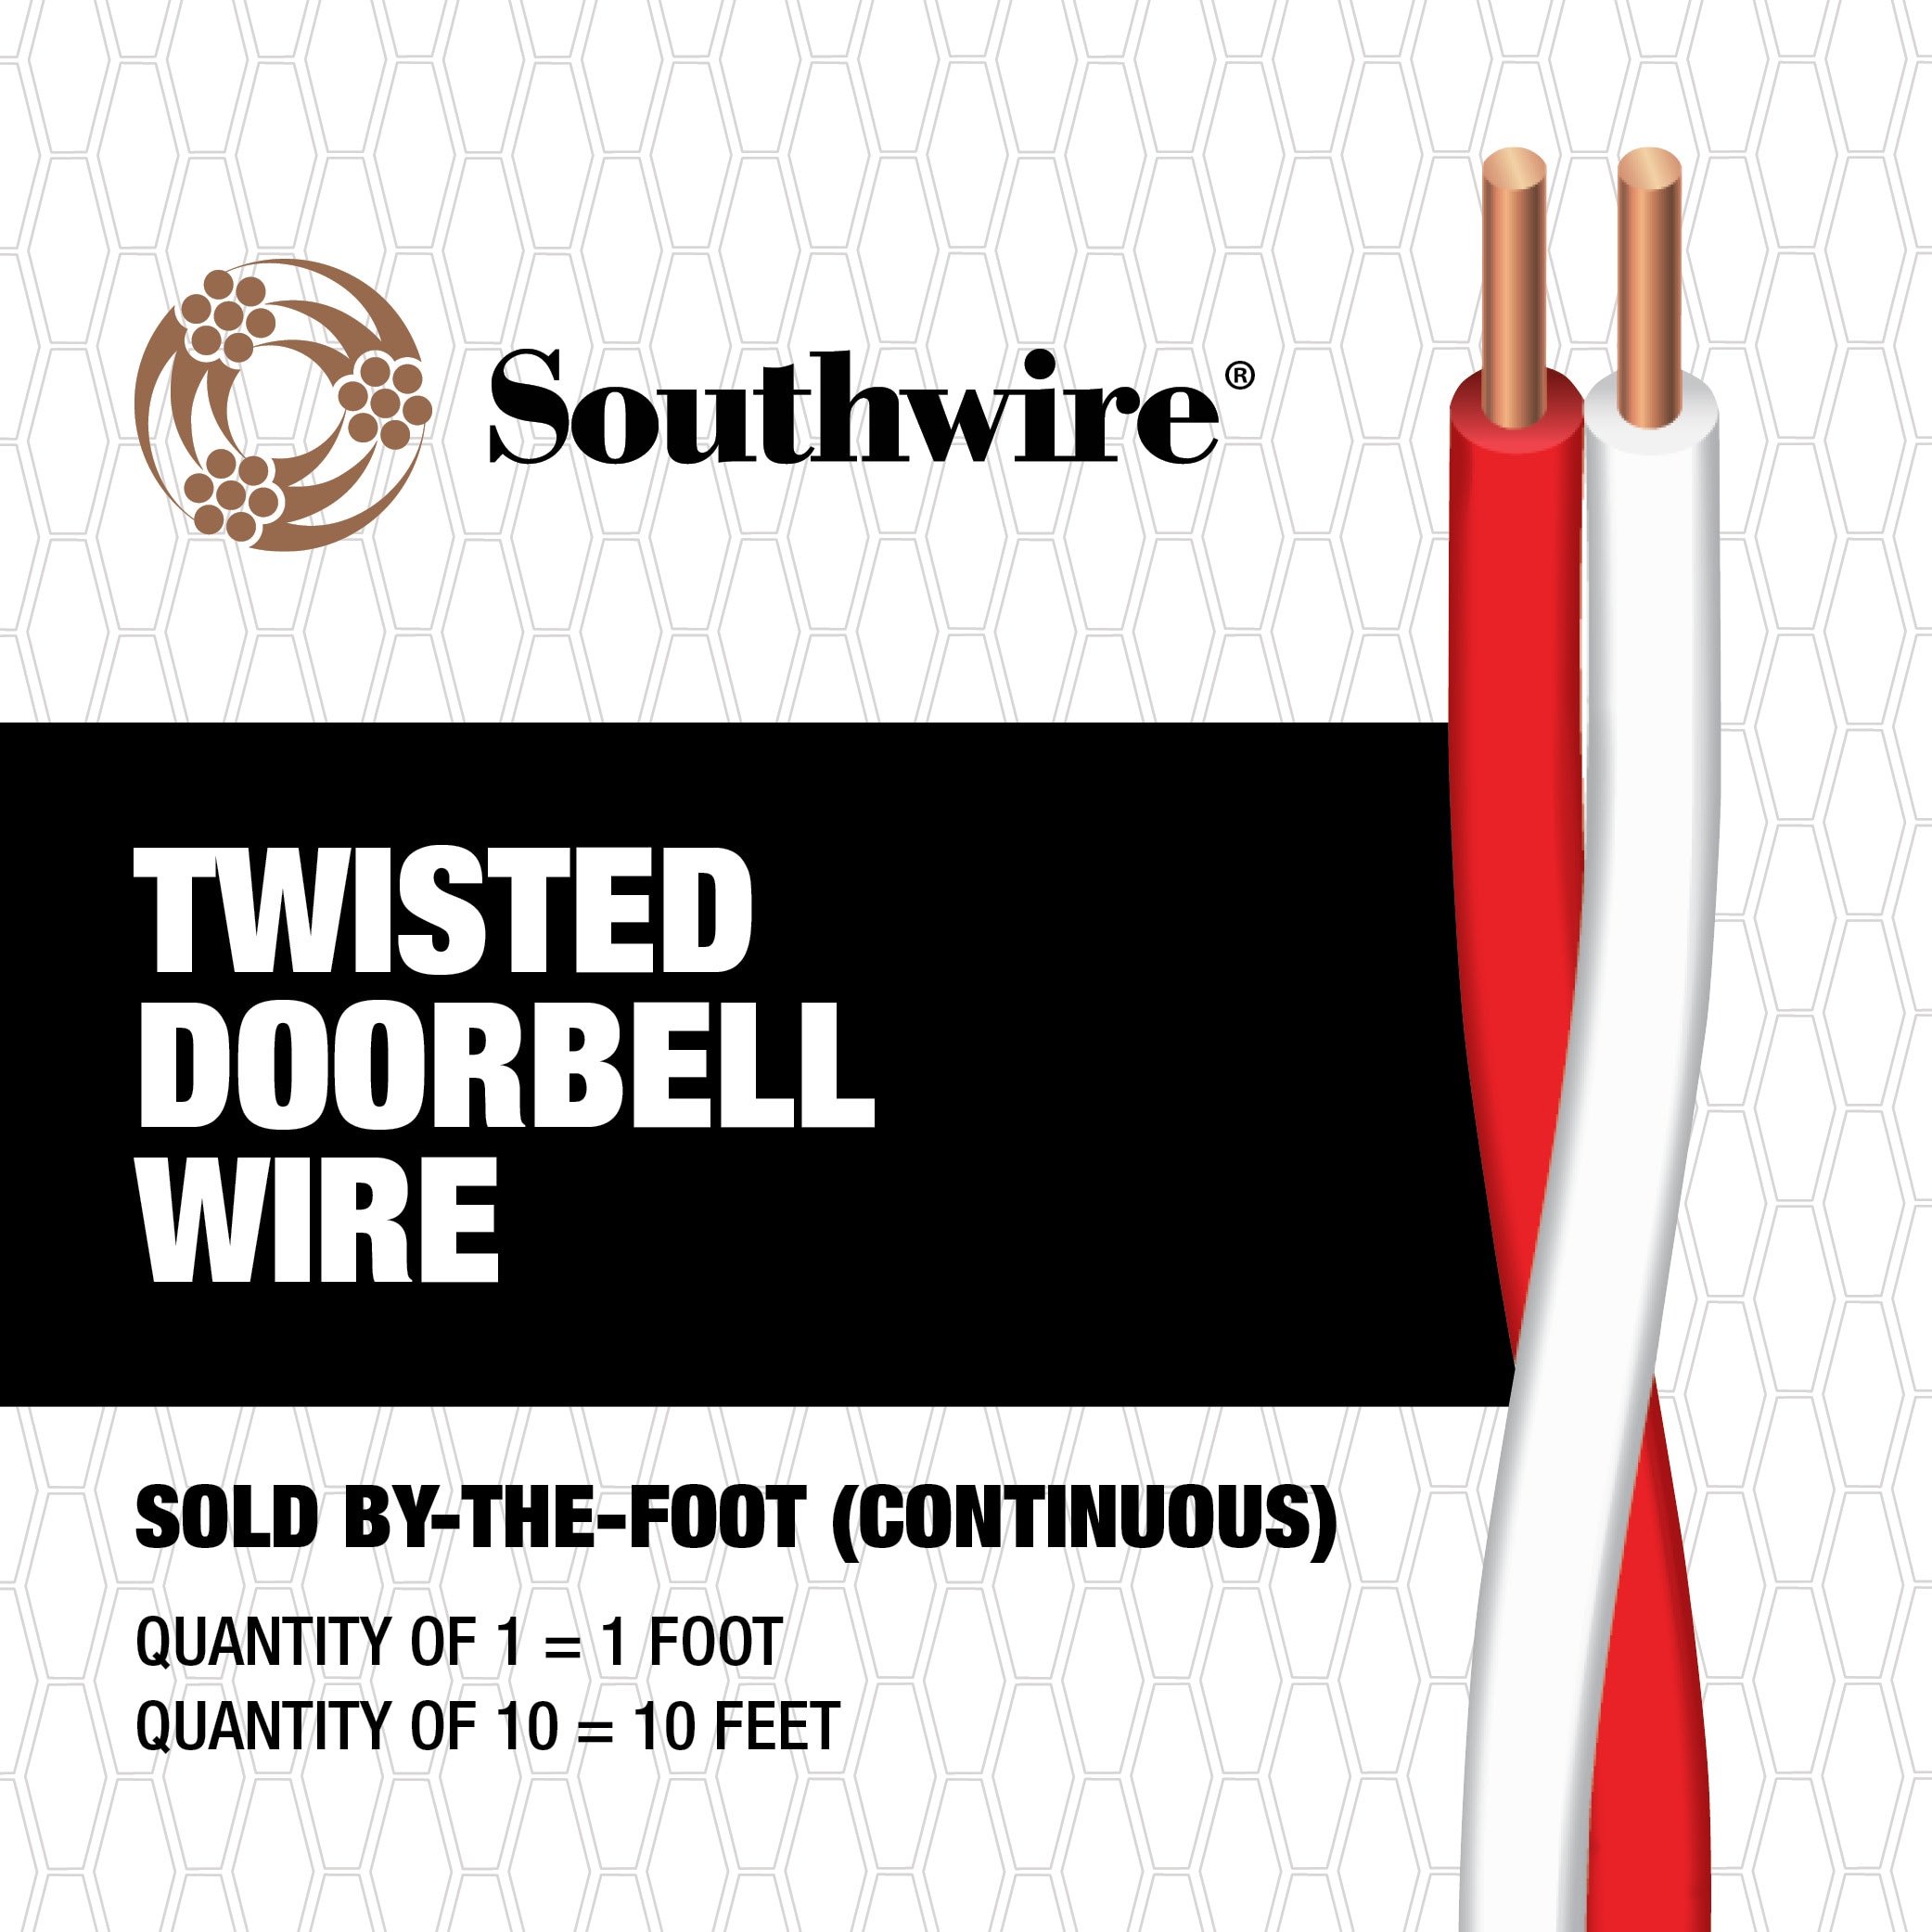 Southwire 100 Ft. 20/2 Solid Twisted Doorbell Wire - Jed's